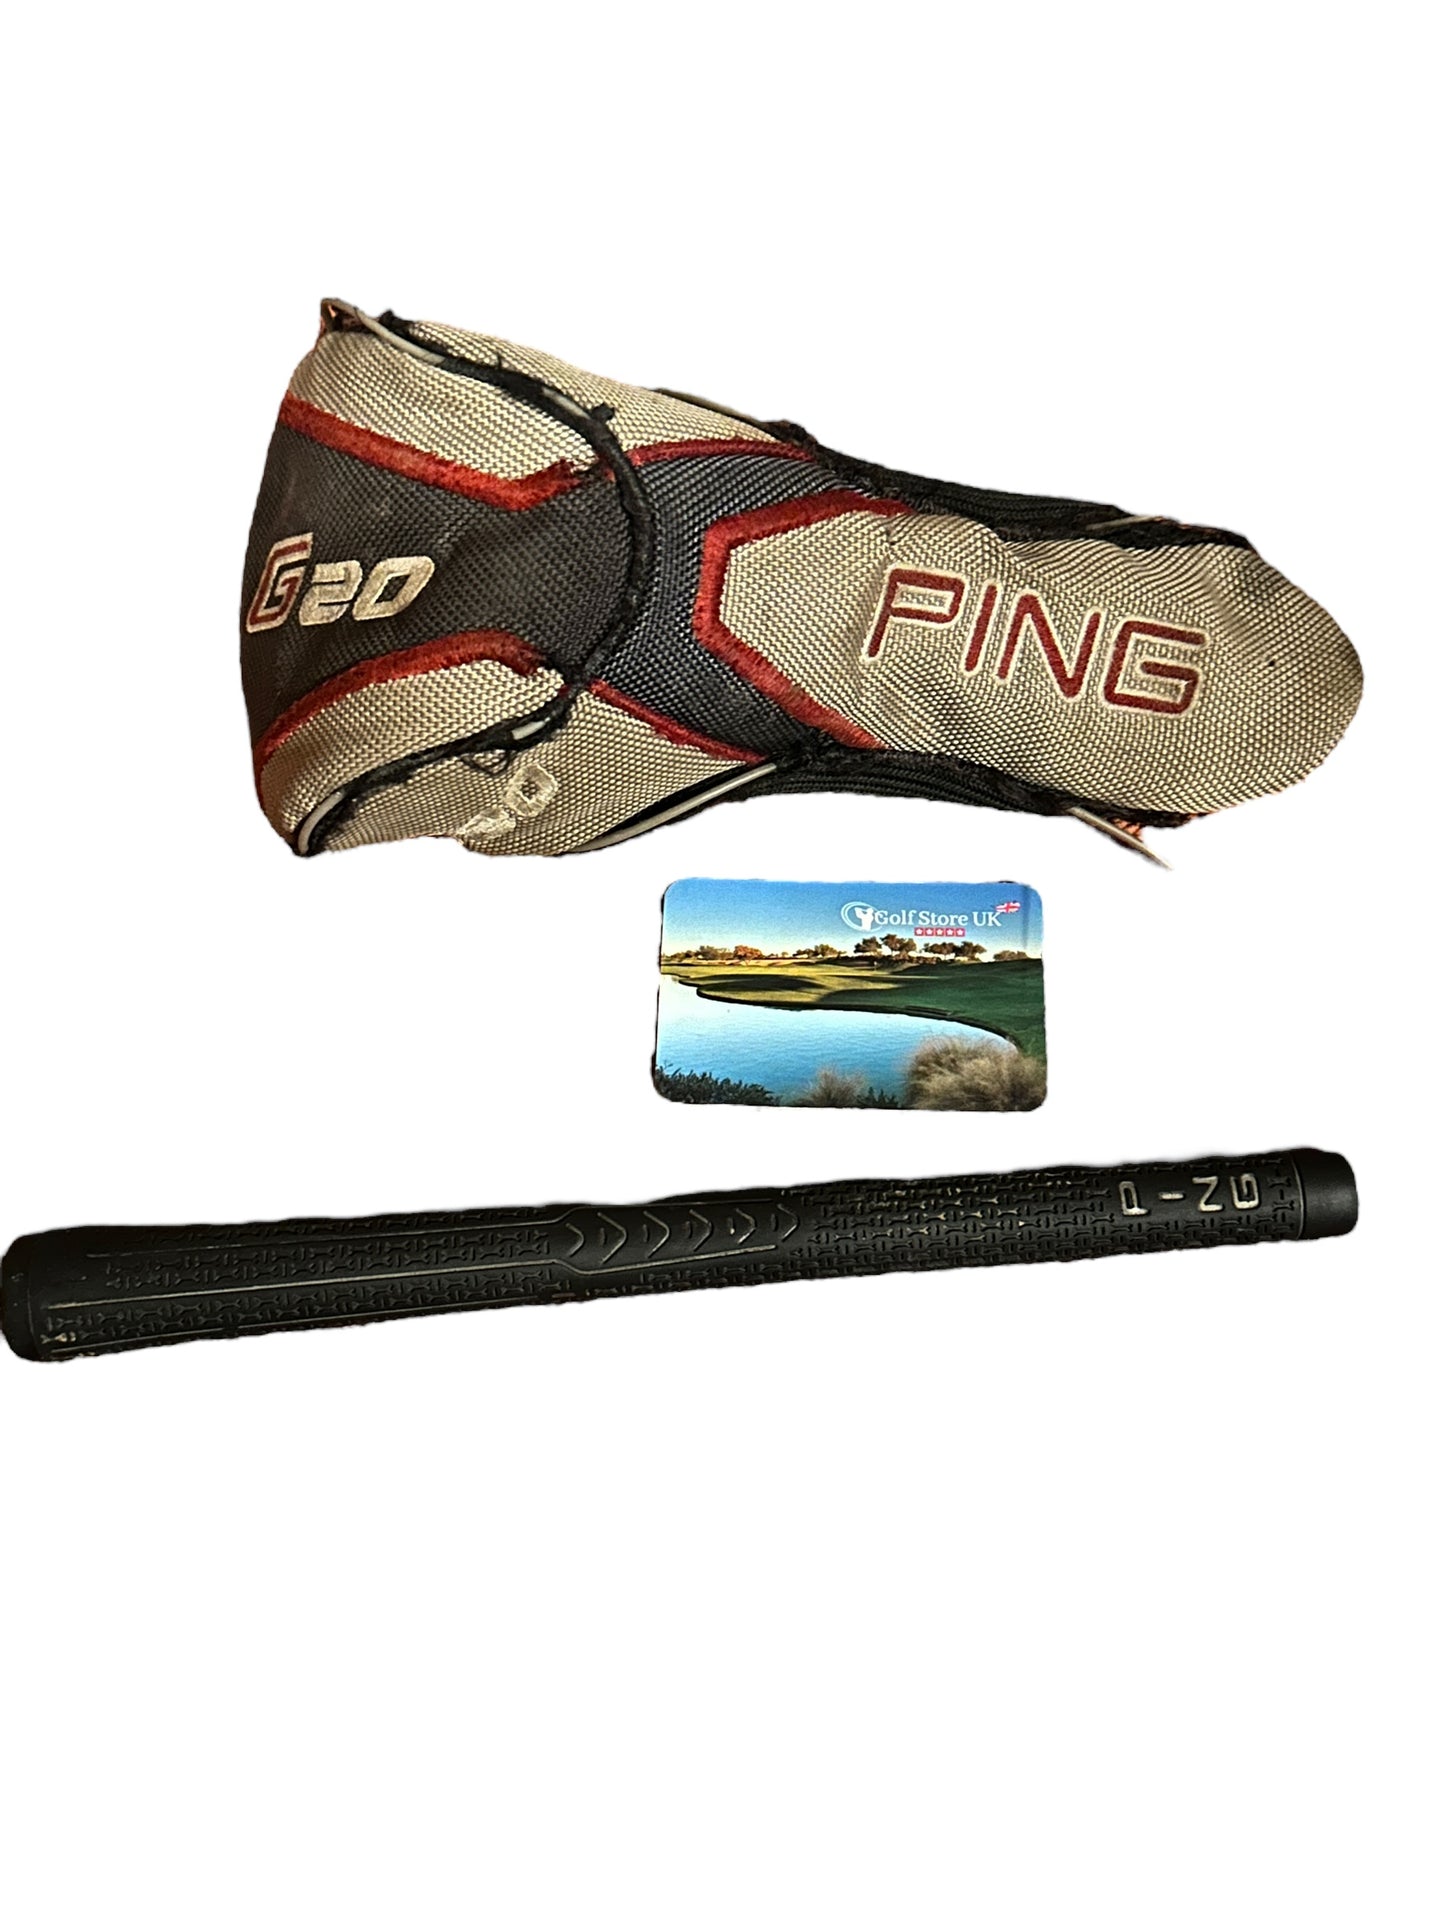 Ping G20 3 Wood With Head Cover